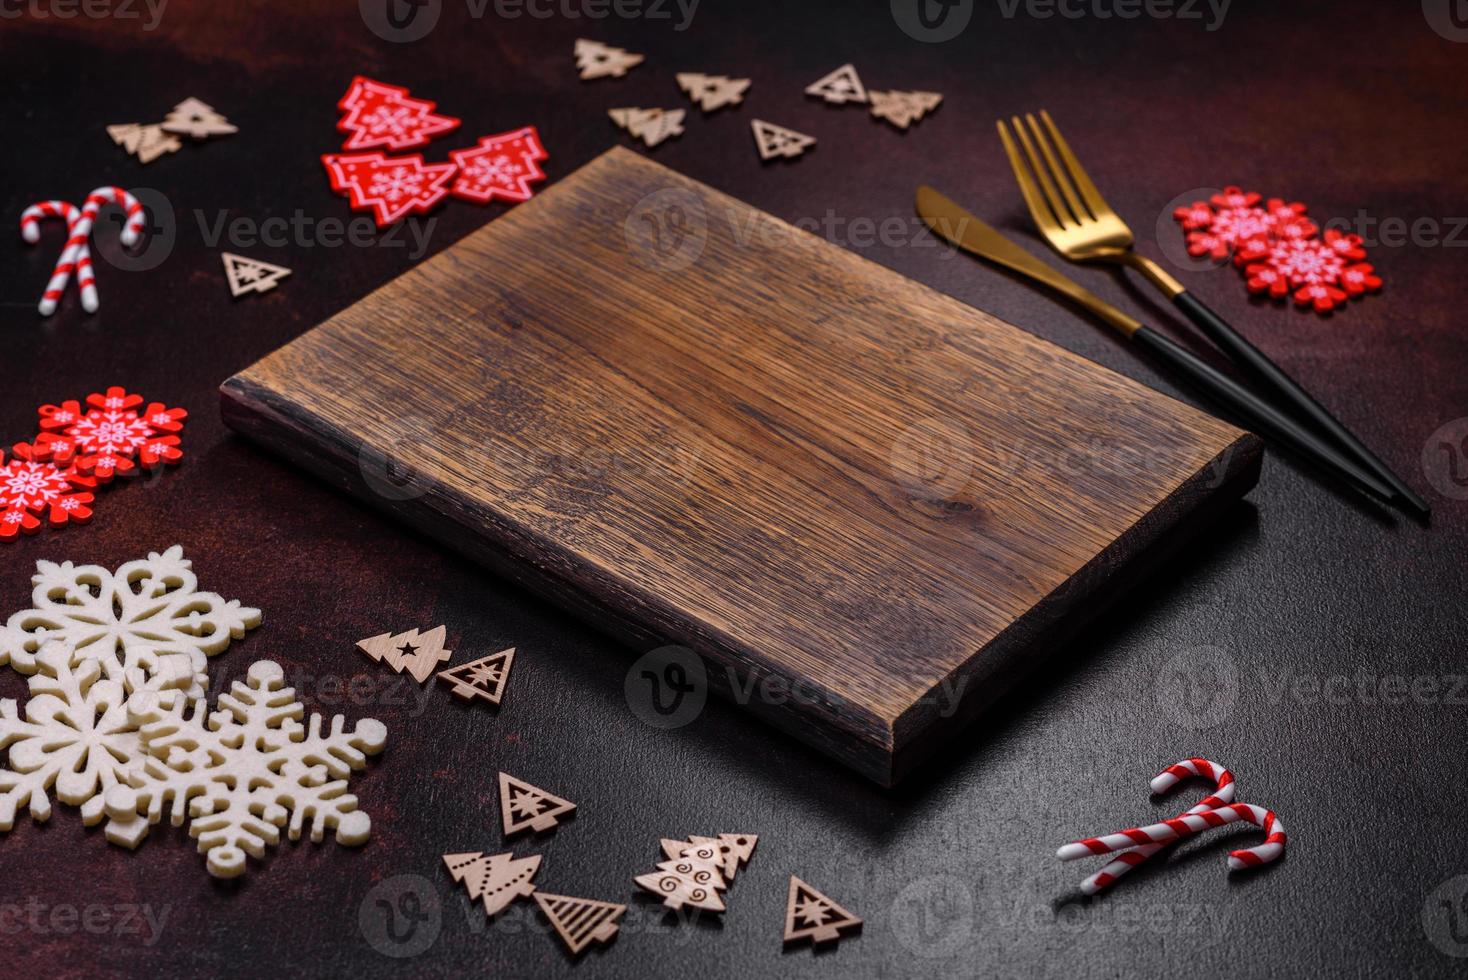 Christmas decoration elements as well as gingerbread on a brown concrete background photo